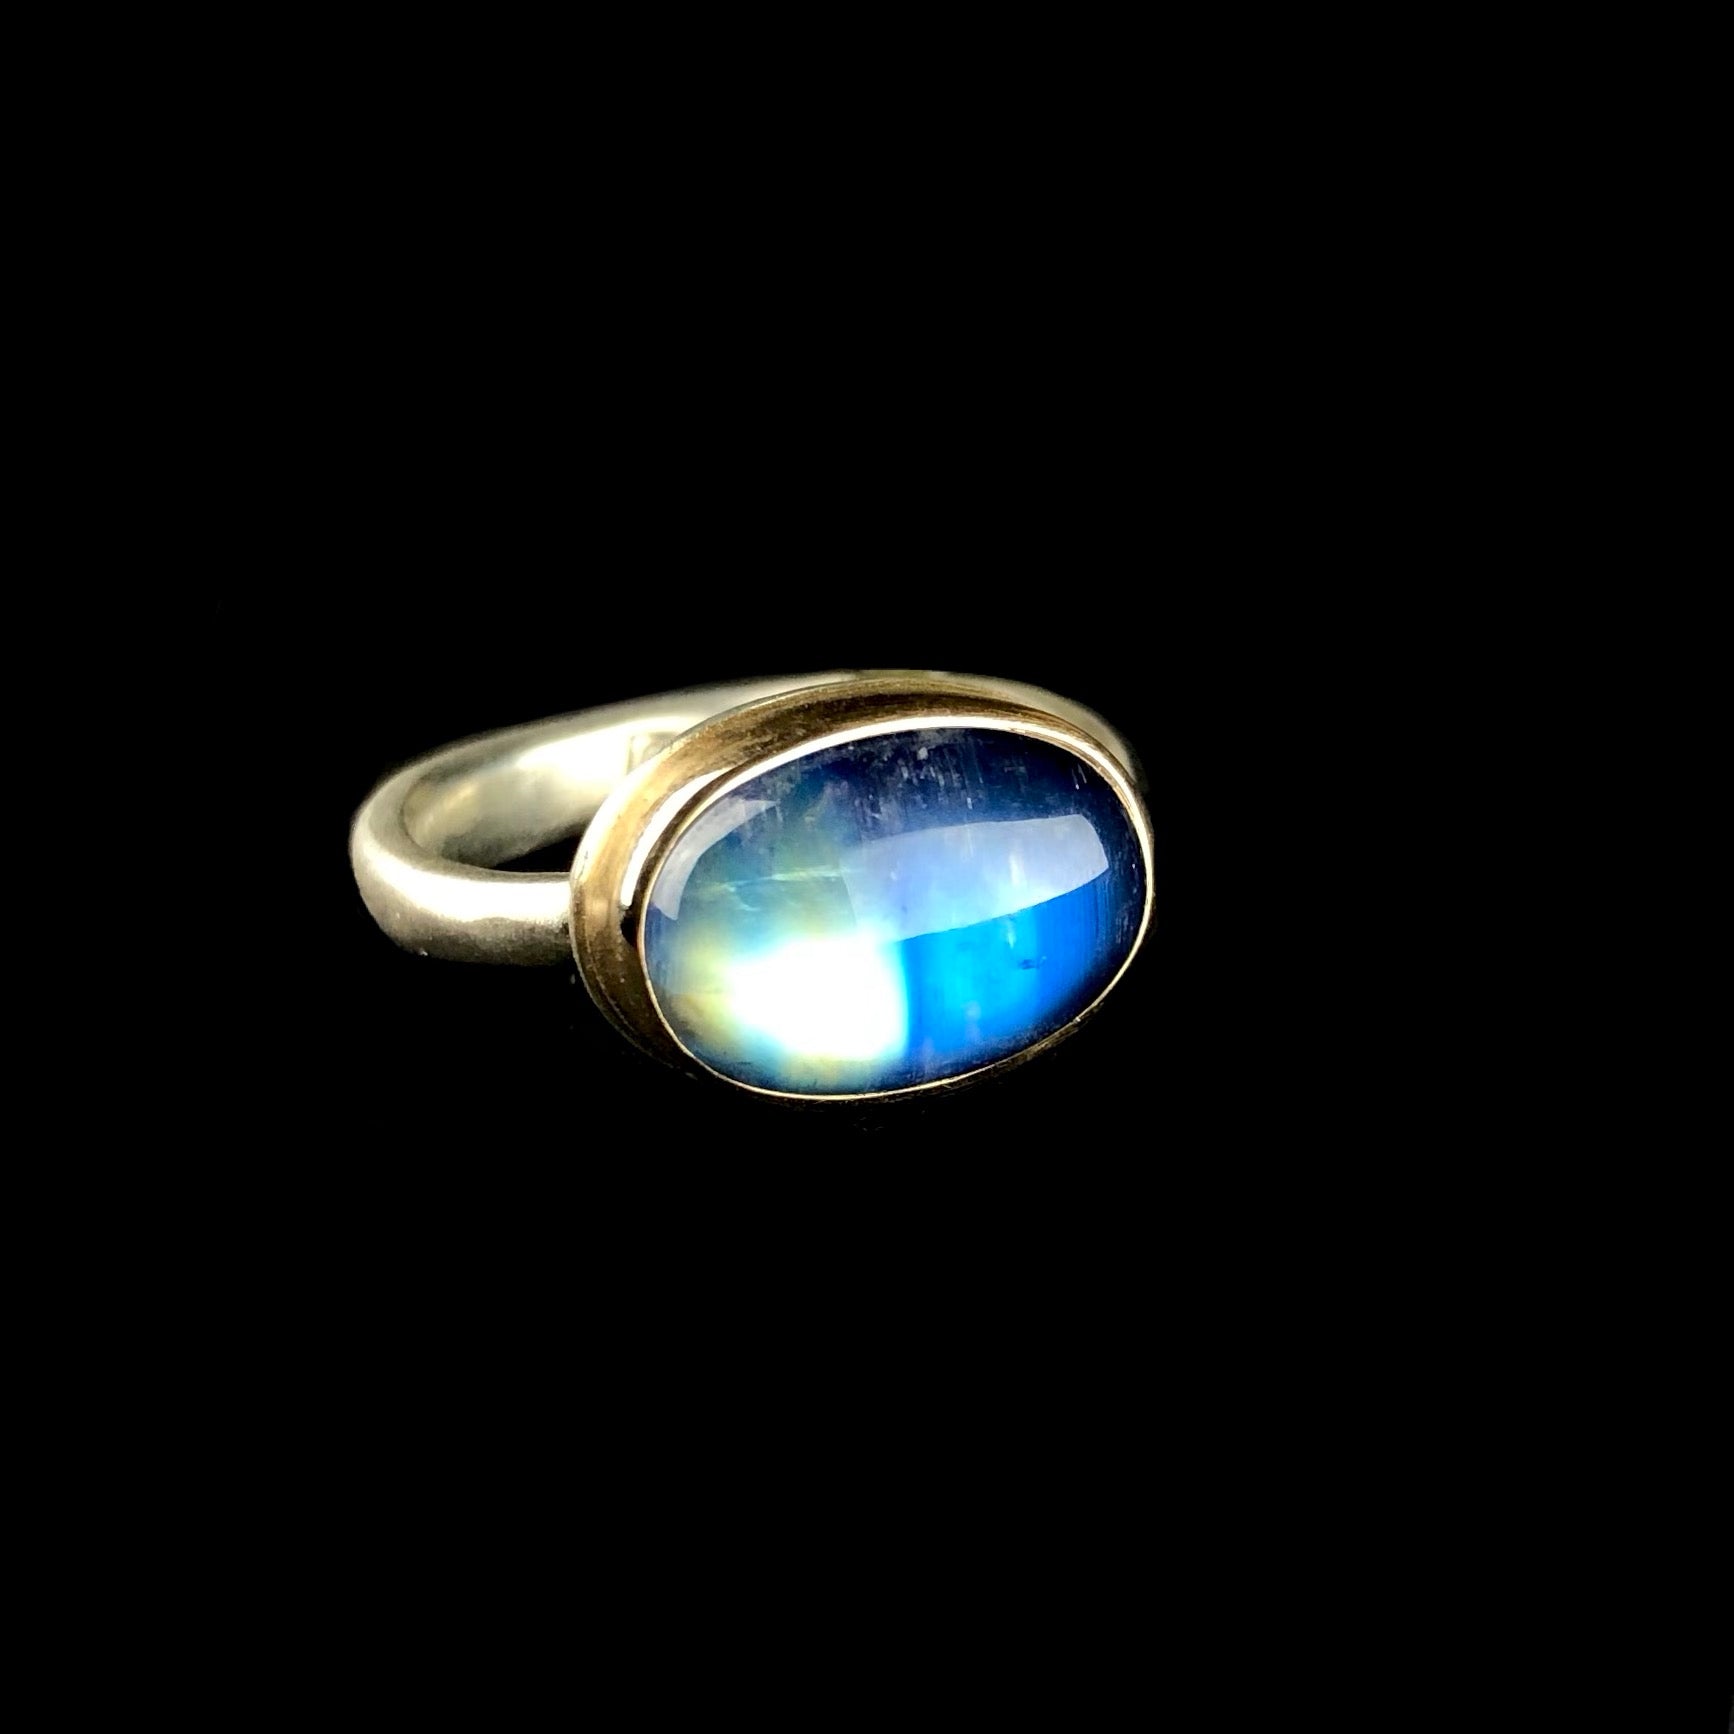 Oval shaped white and blue colored rainbow moonstone ring